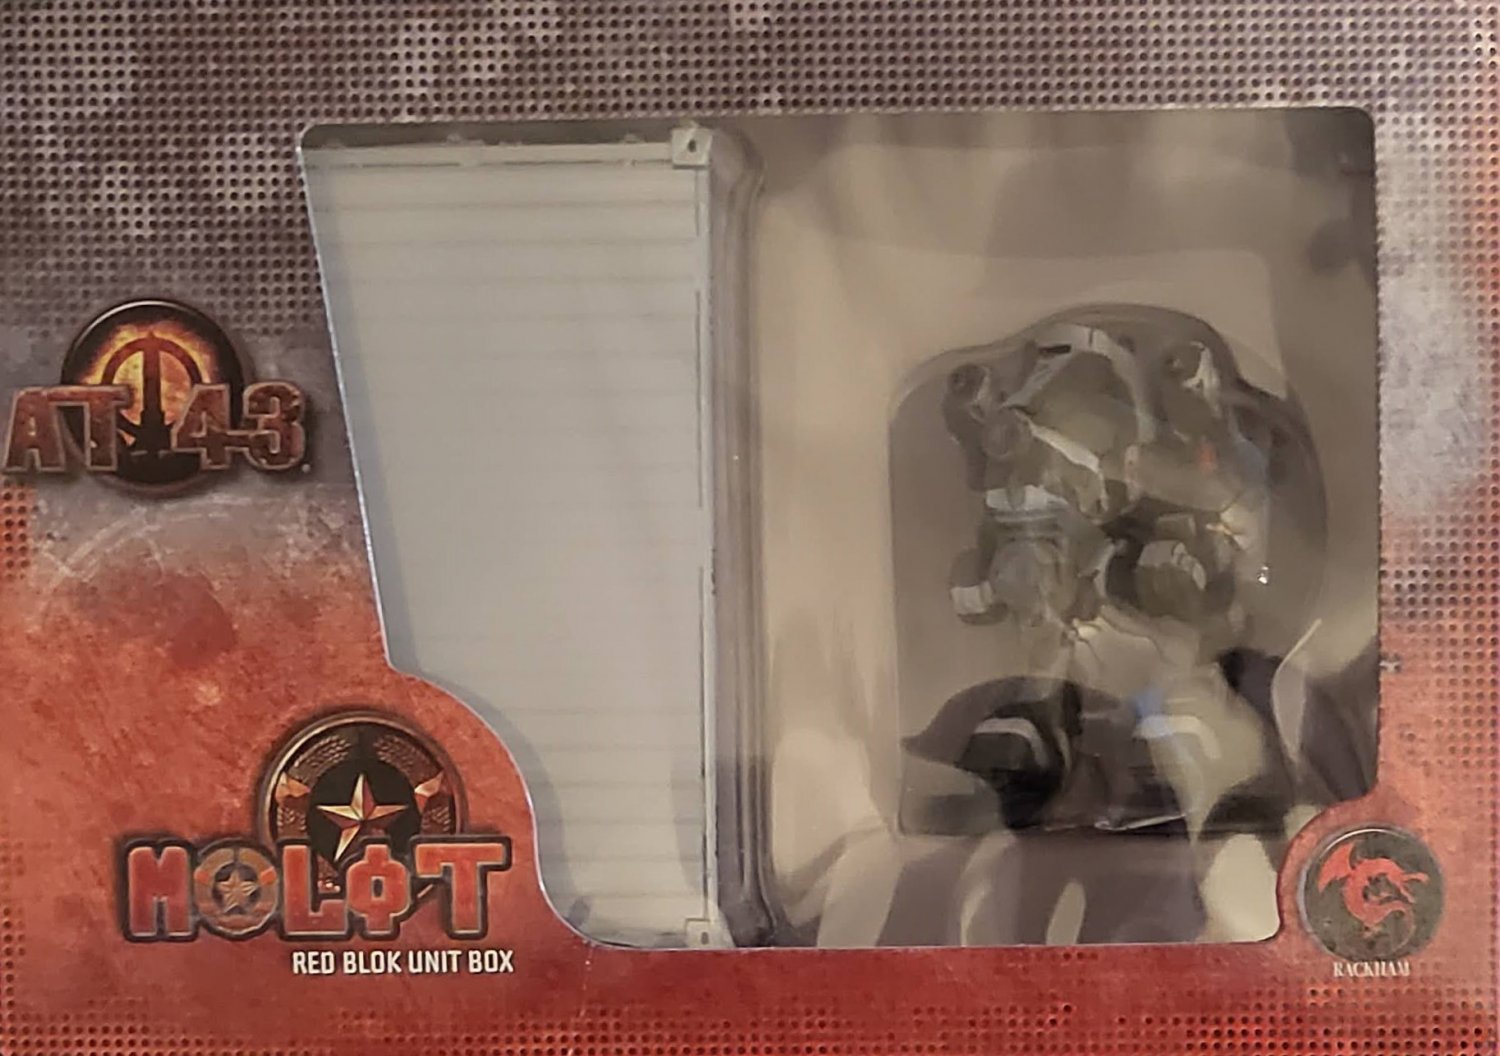 AT-43 Therians Storm Golems Unit Box OPEN BOX WITH CARDS RACKHAM